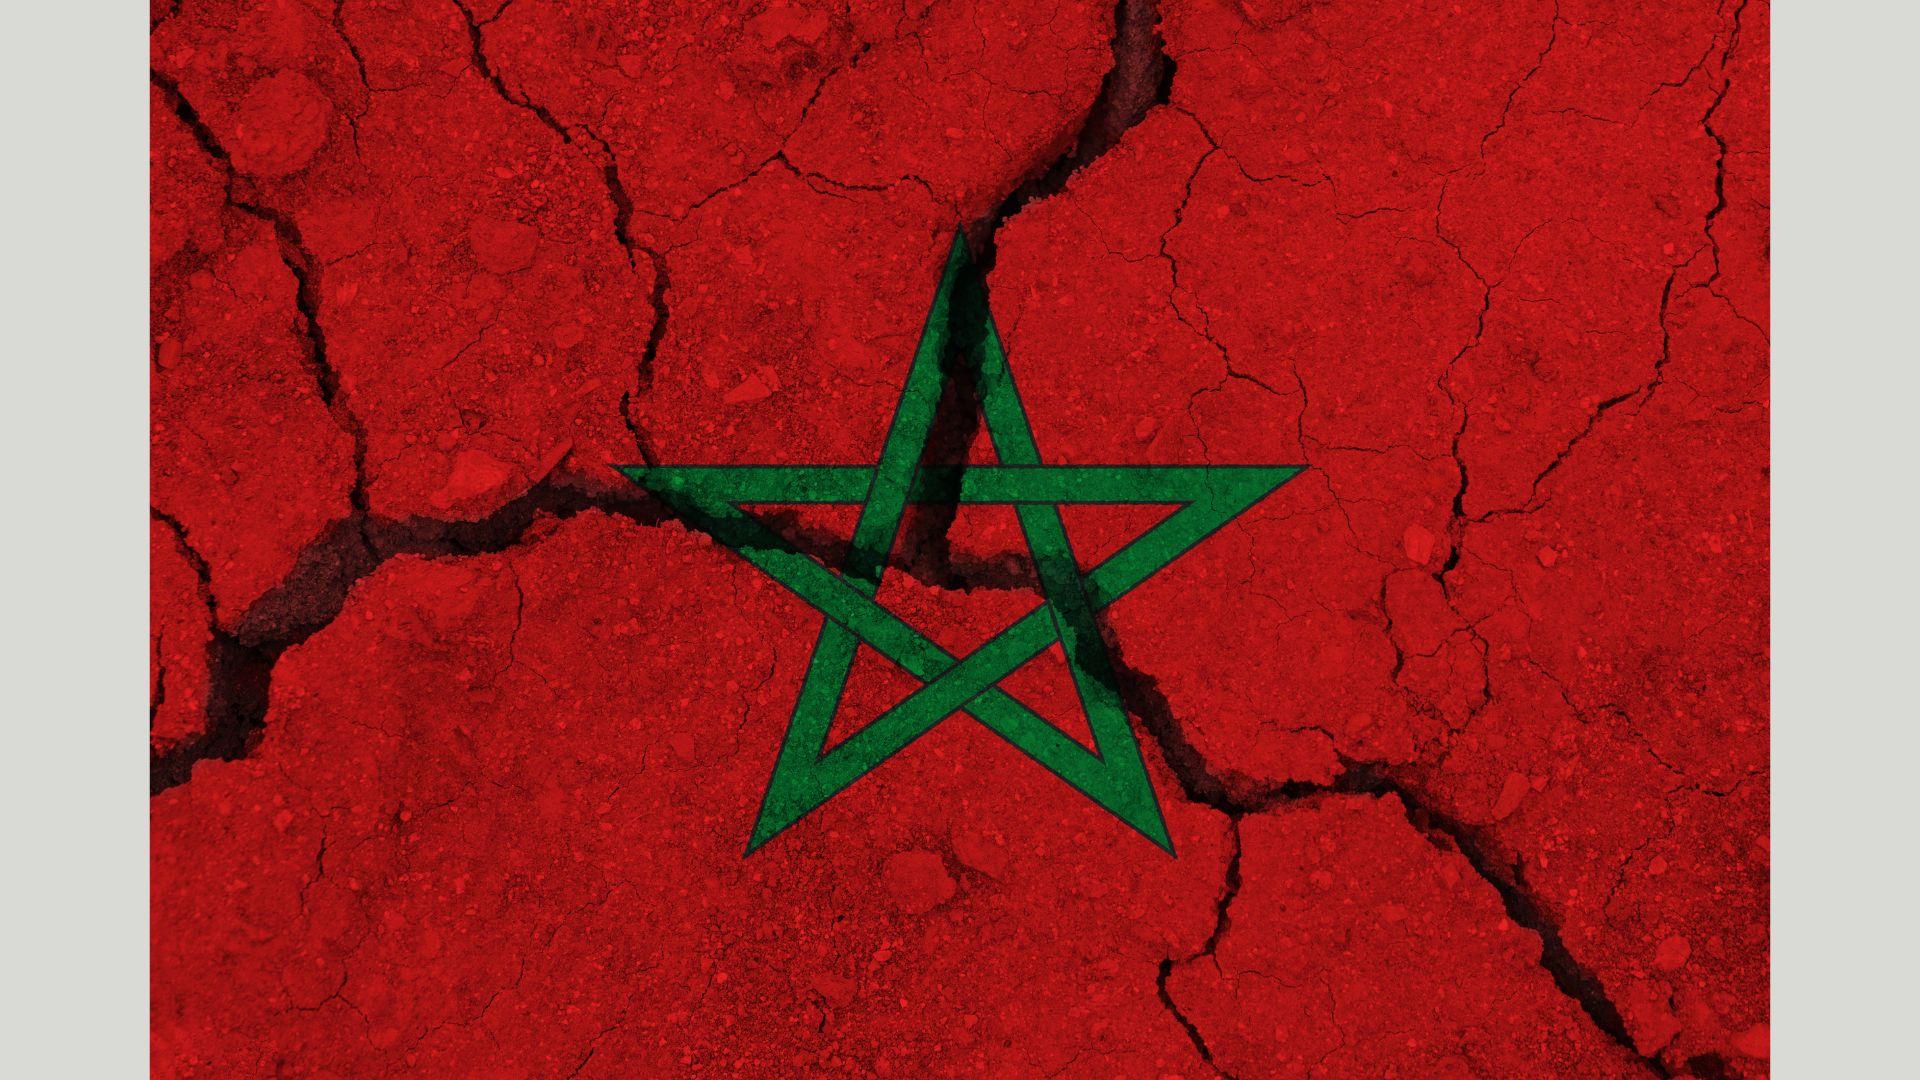 Moroccan Flag with crack in it